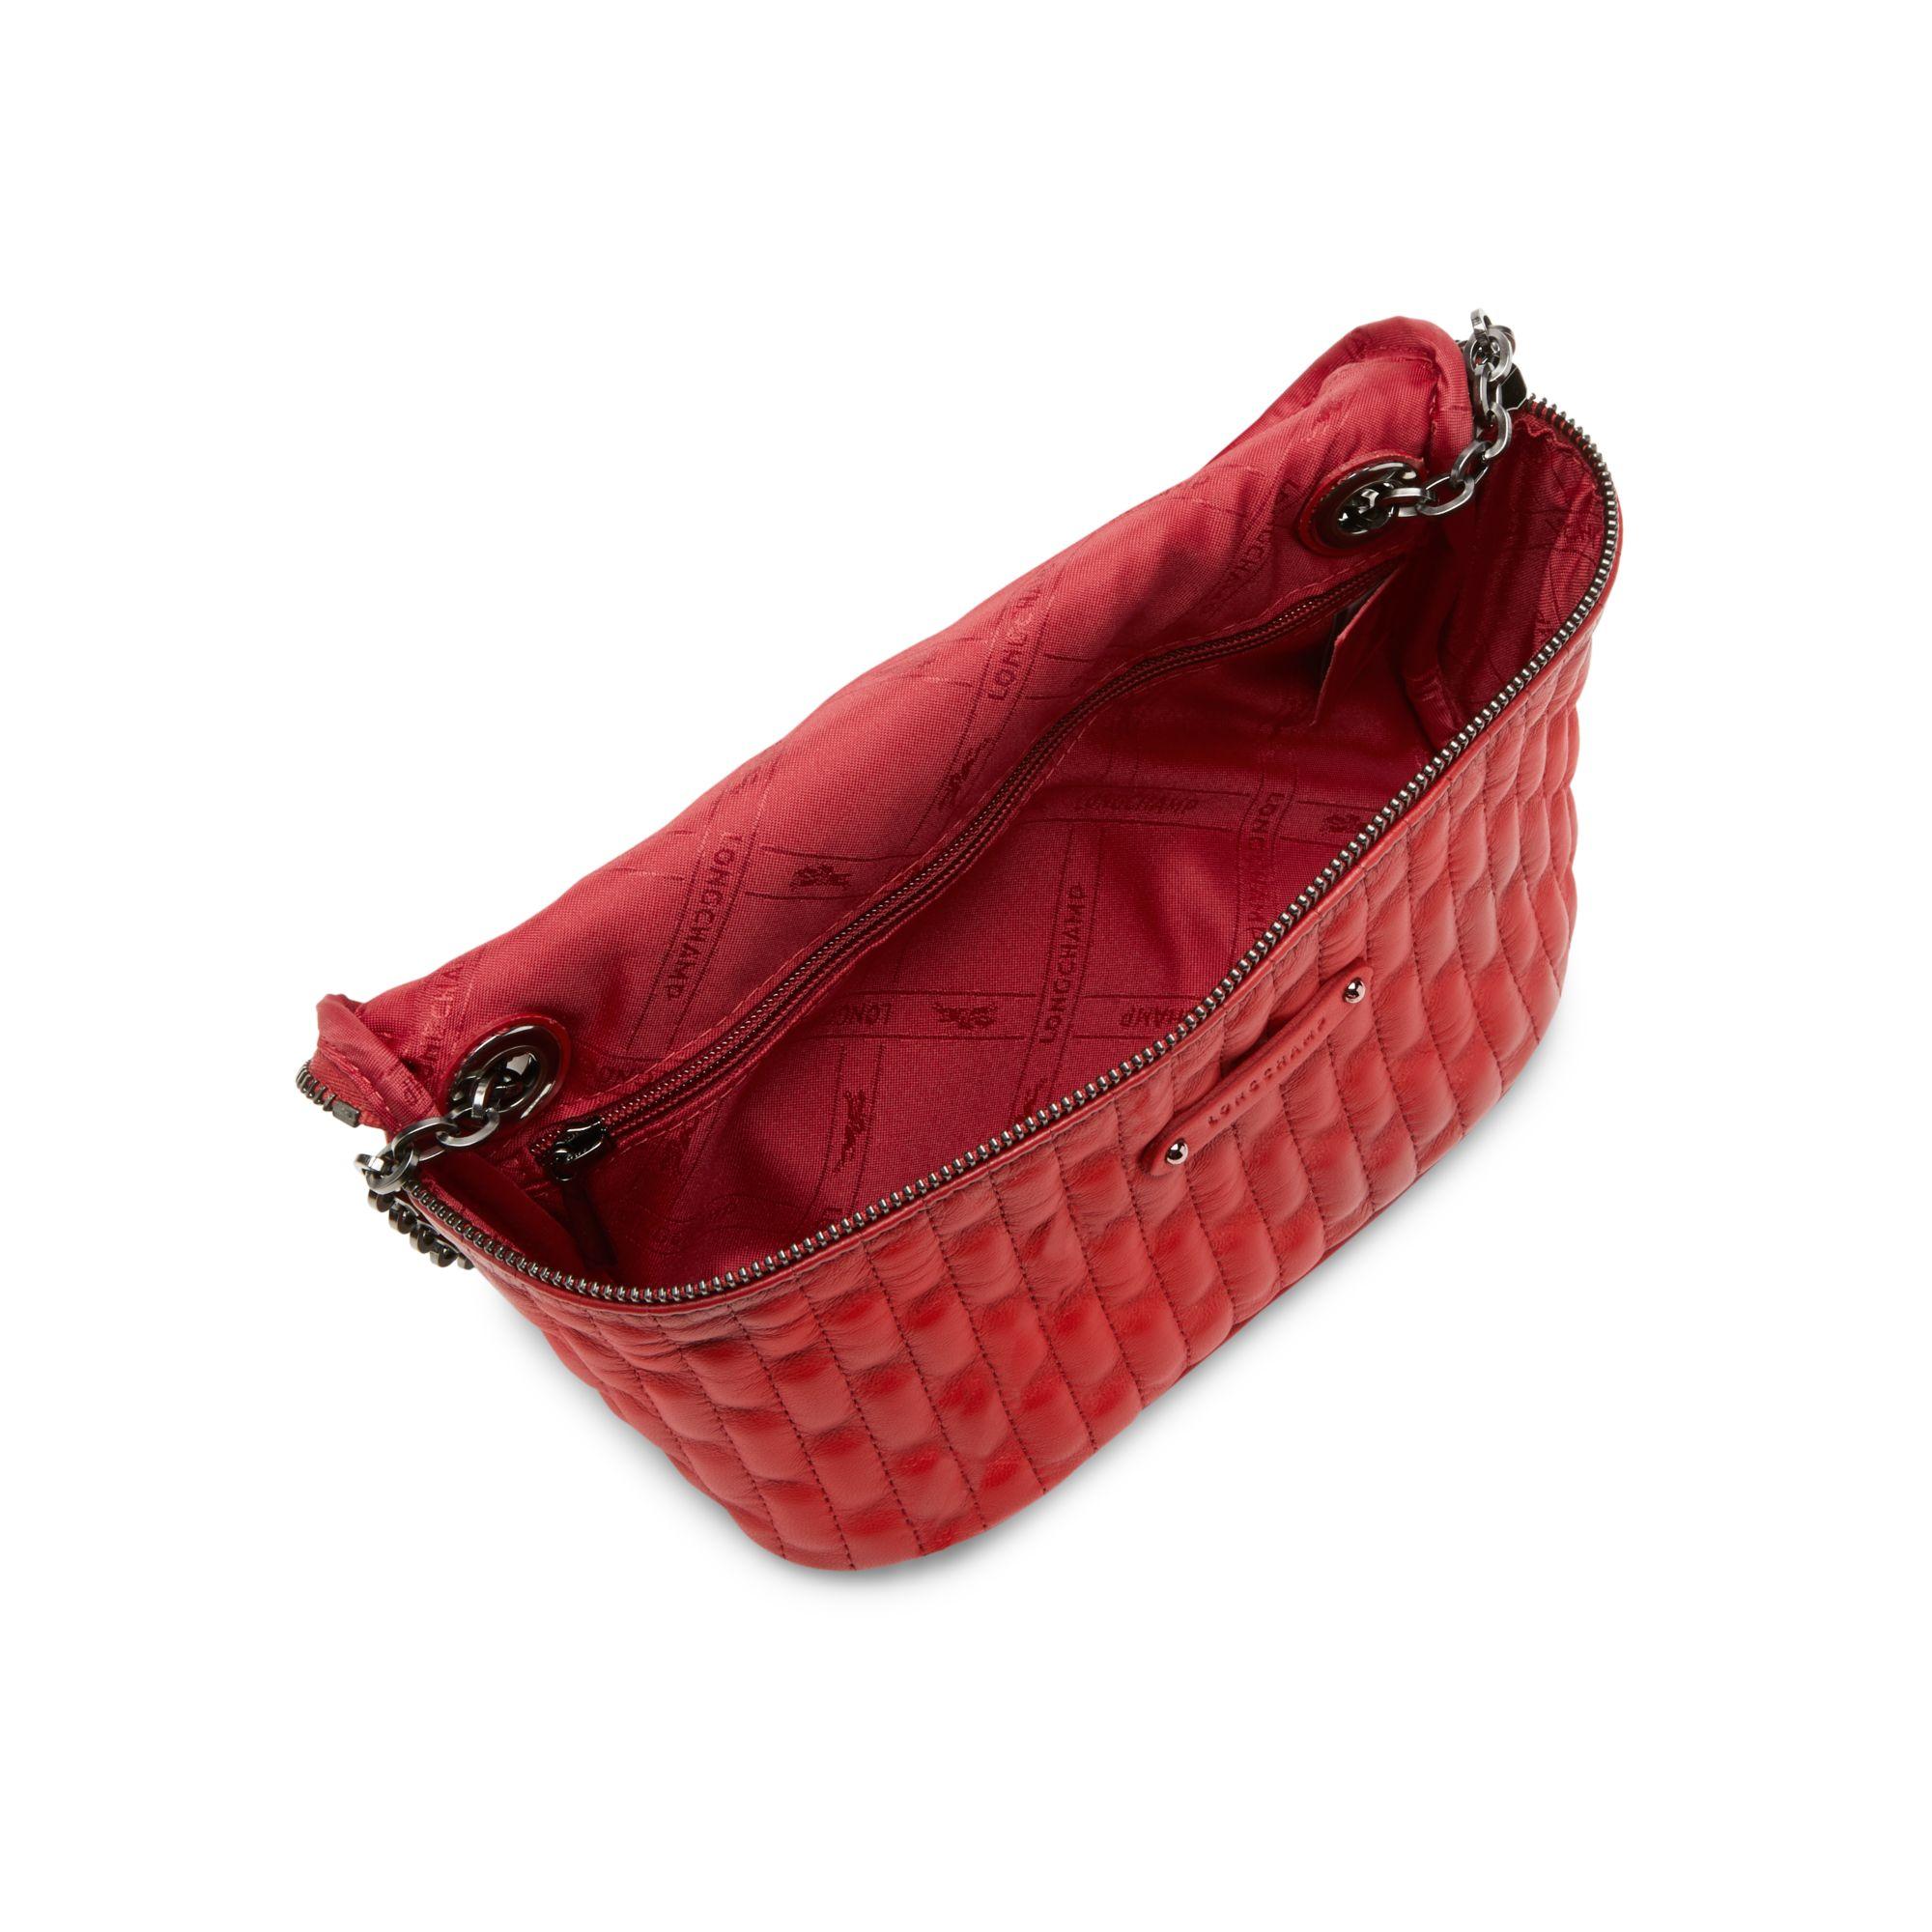 Longchamp e Quilted Leather Convertible Belt Bag in Red